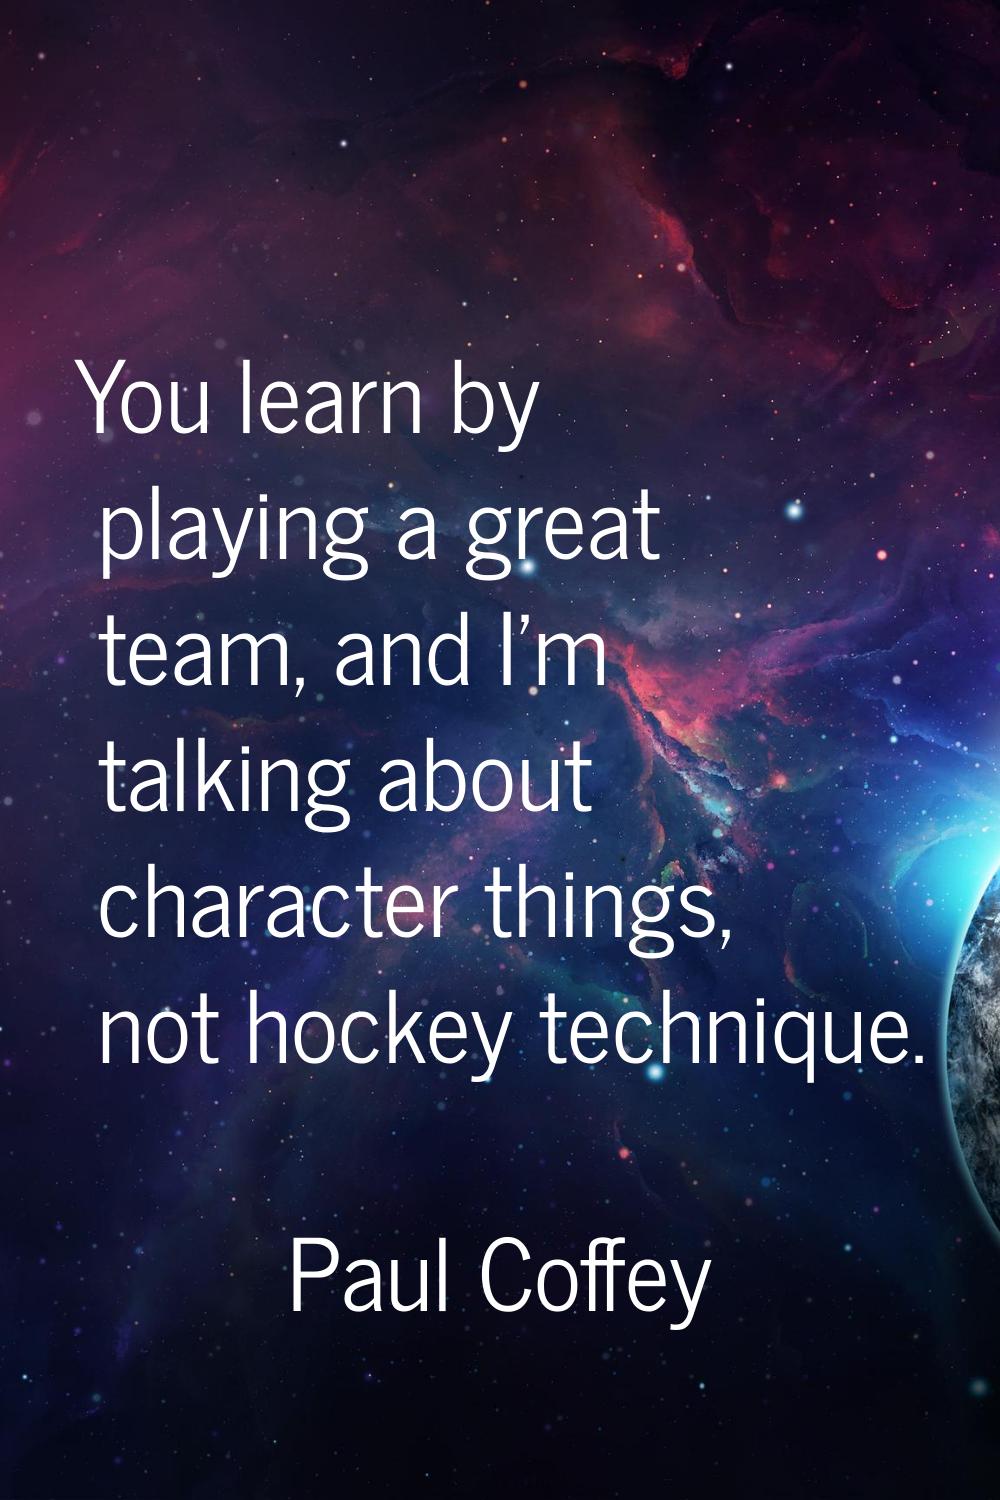 You learn by playing a great team, and I'm talking about character things, not hockey technique.